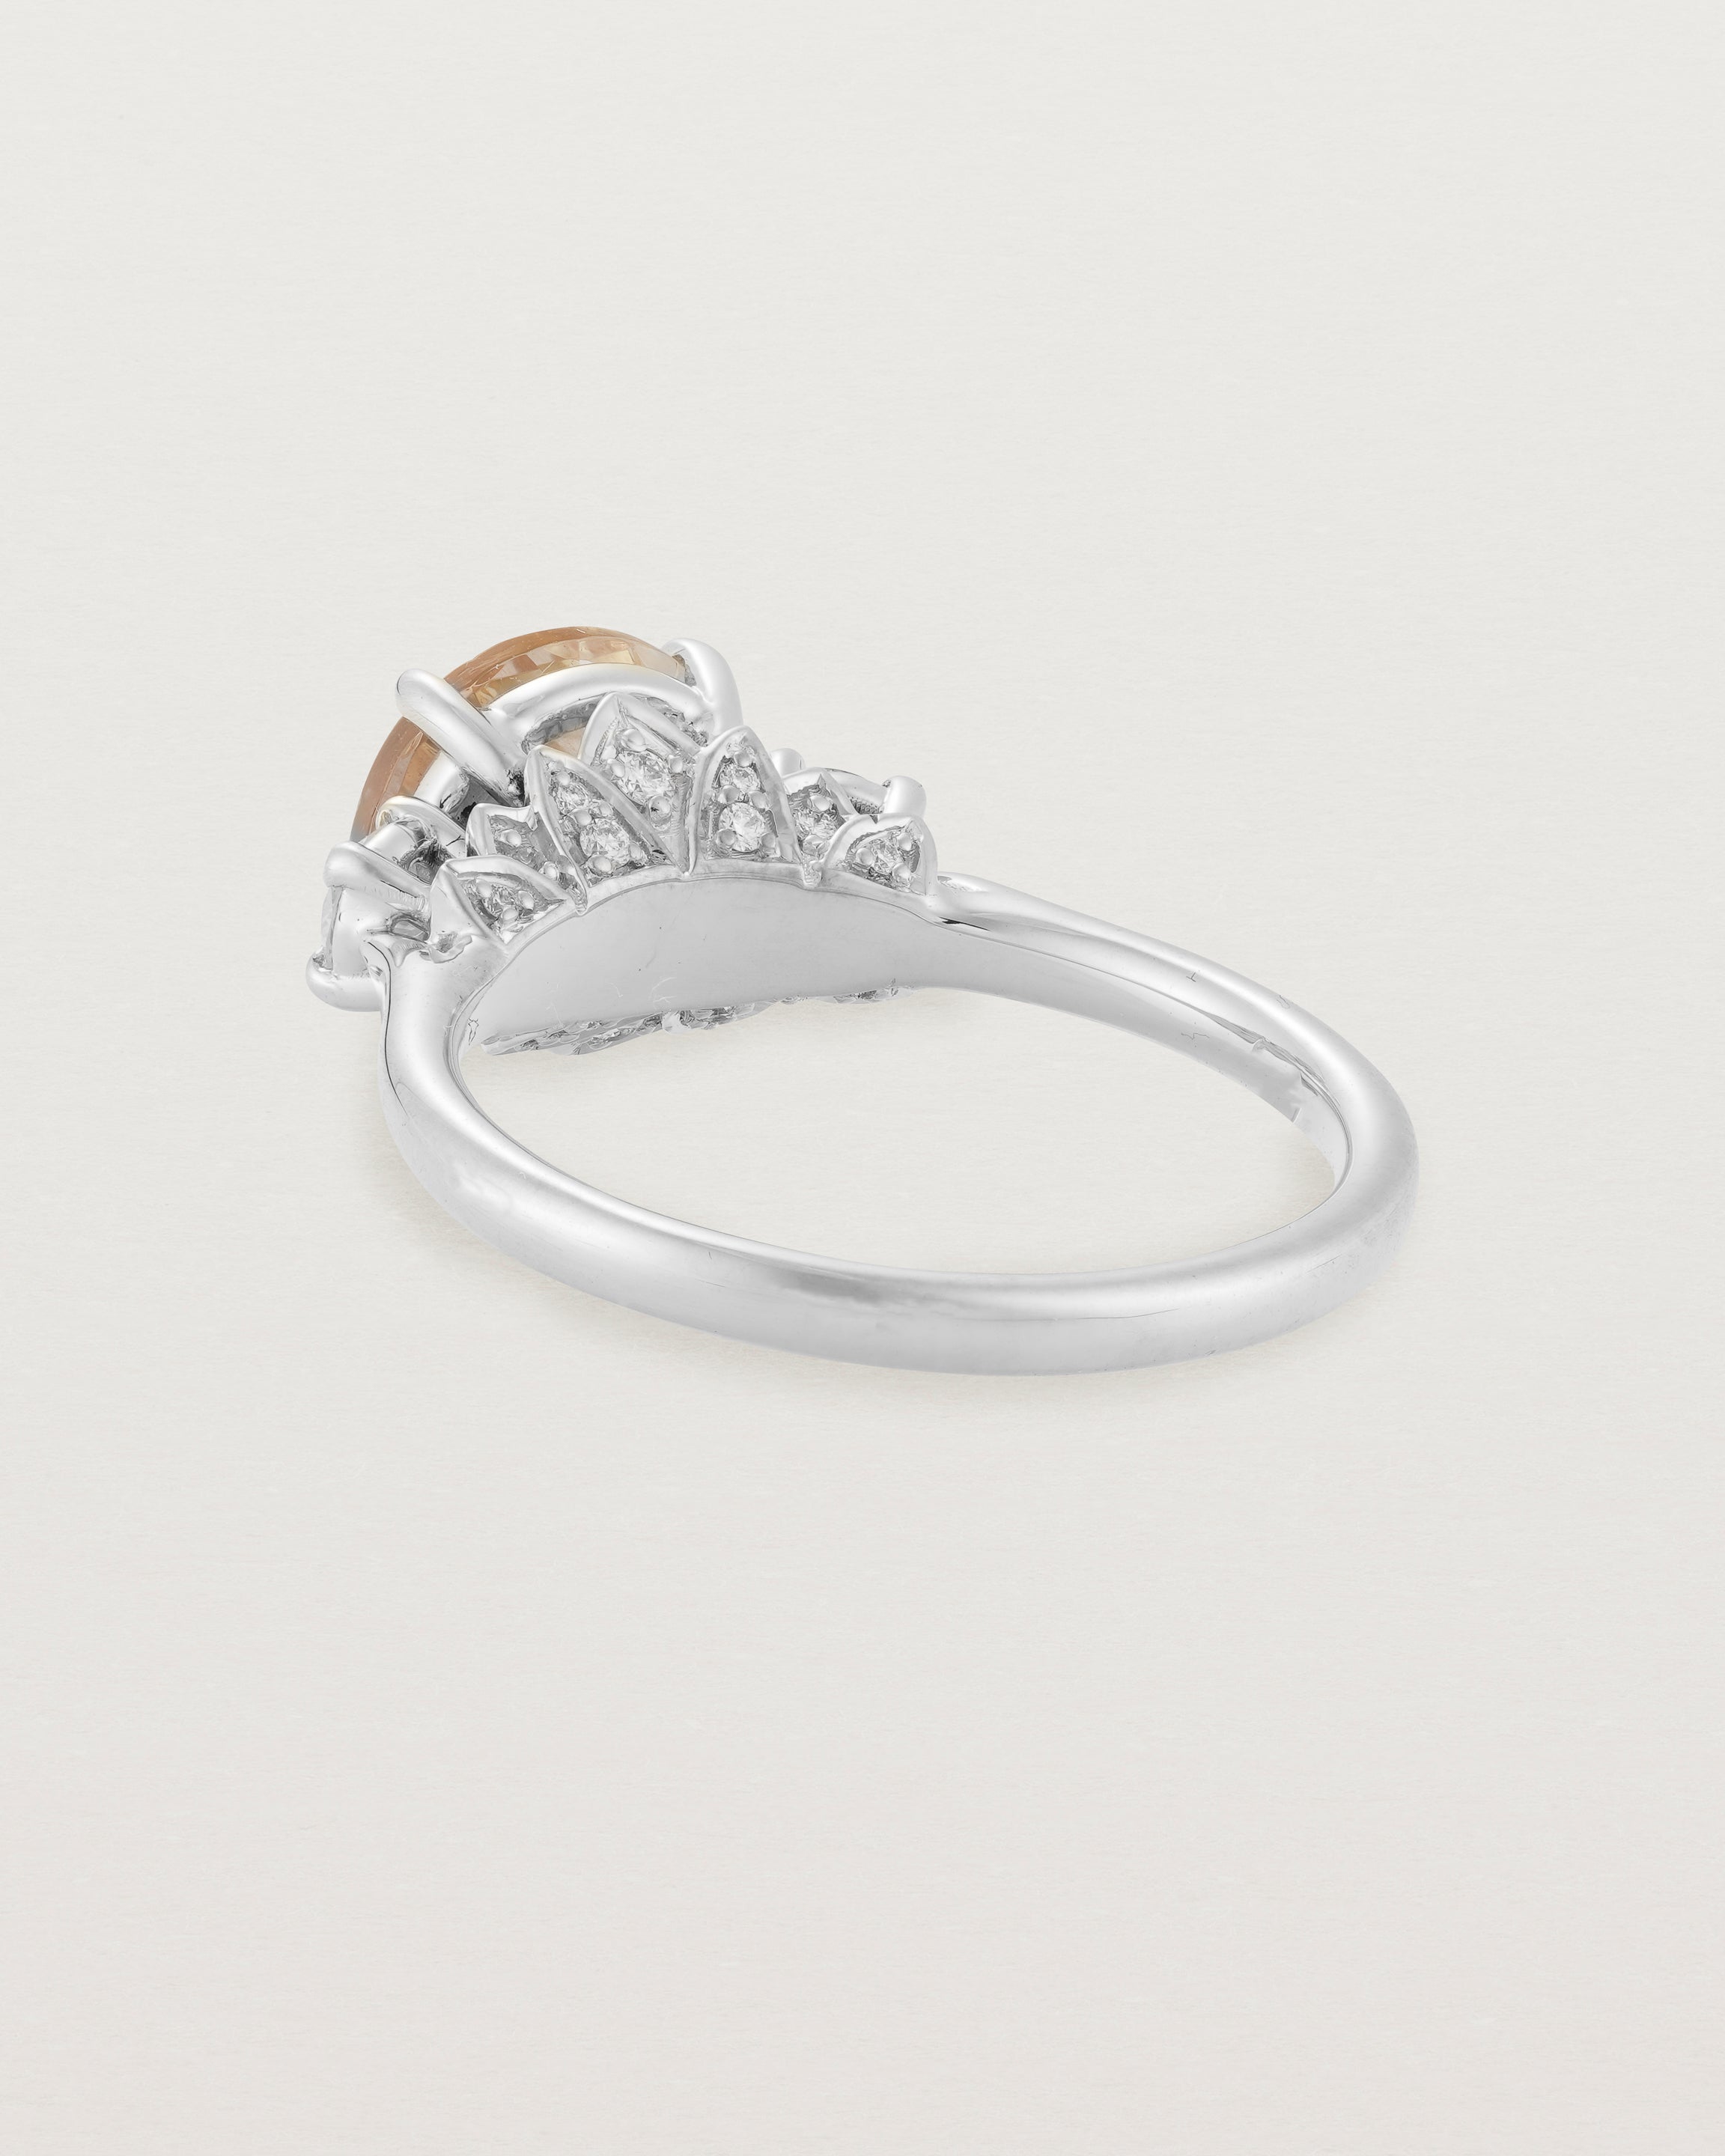 Back view of the Laurel Round Trio Ring | Savannah Sunstone | White Gold.